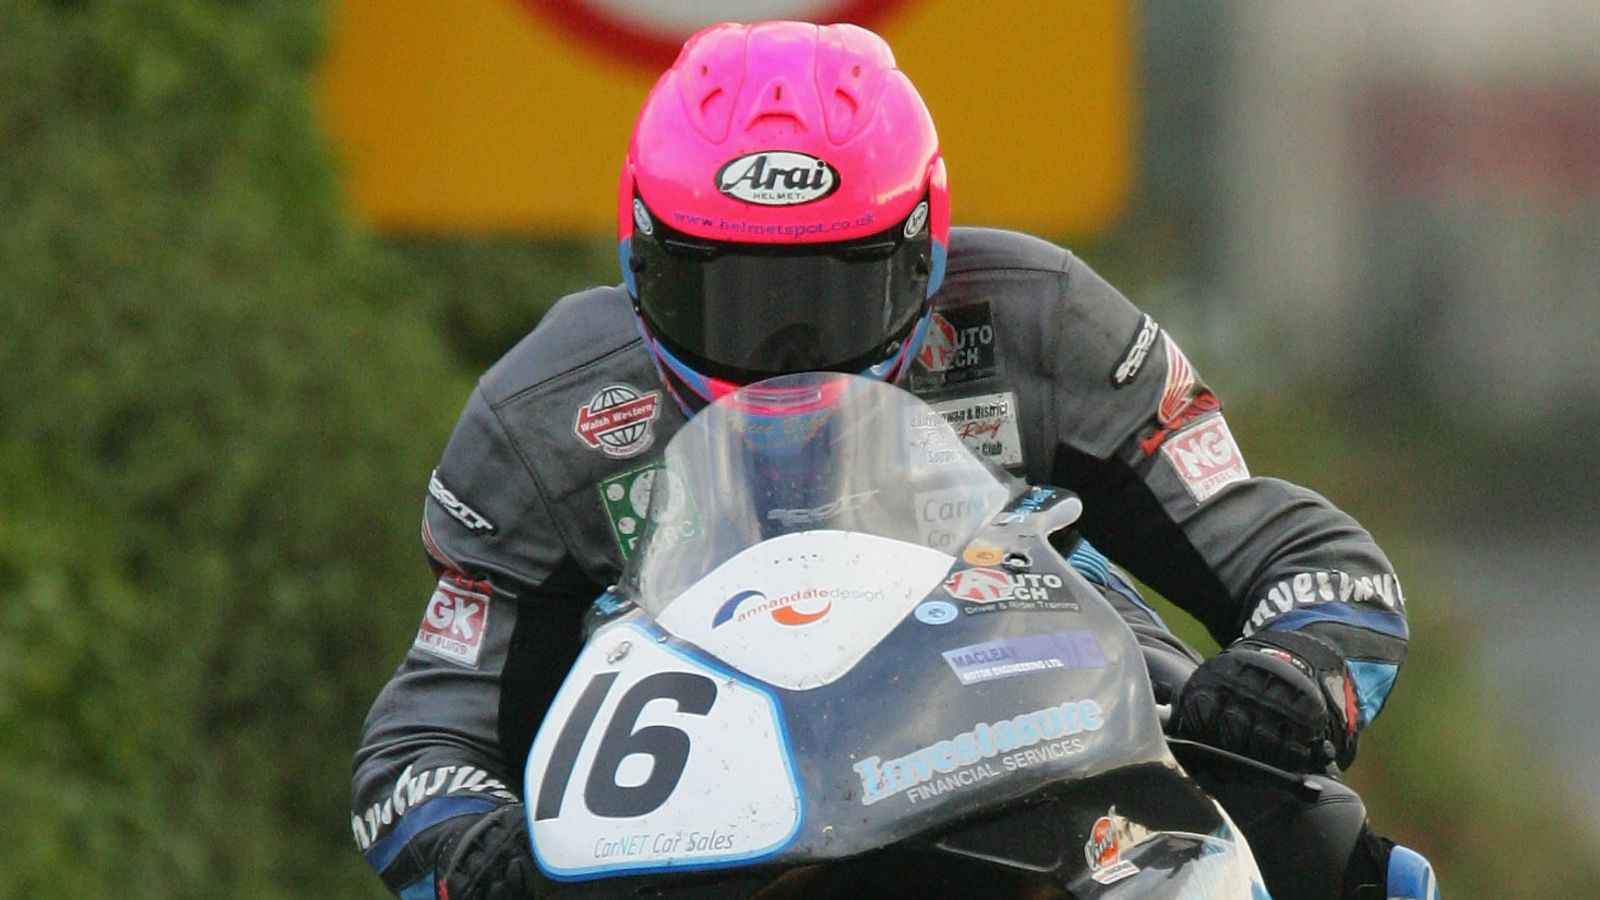 Davy Morgan dies after accident at Isle of Man TT races